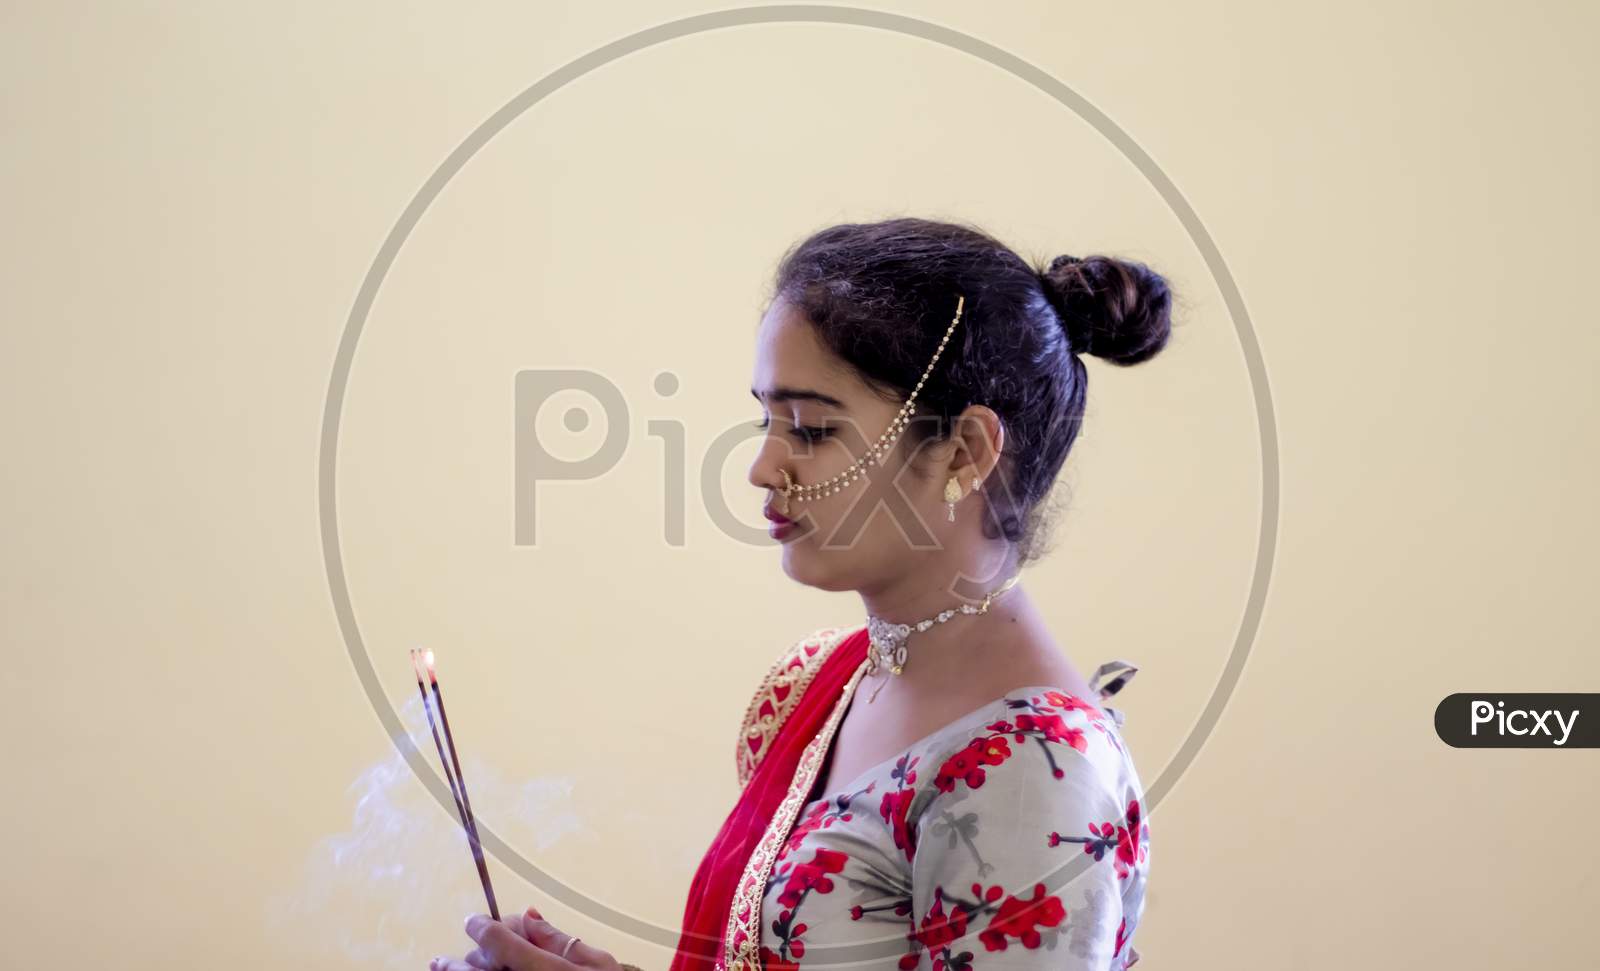 A Beautiful Young Hindu Girl With Incense Sticks Burning With Smoke And Gold Ornaments According To Her Traditions And Customs